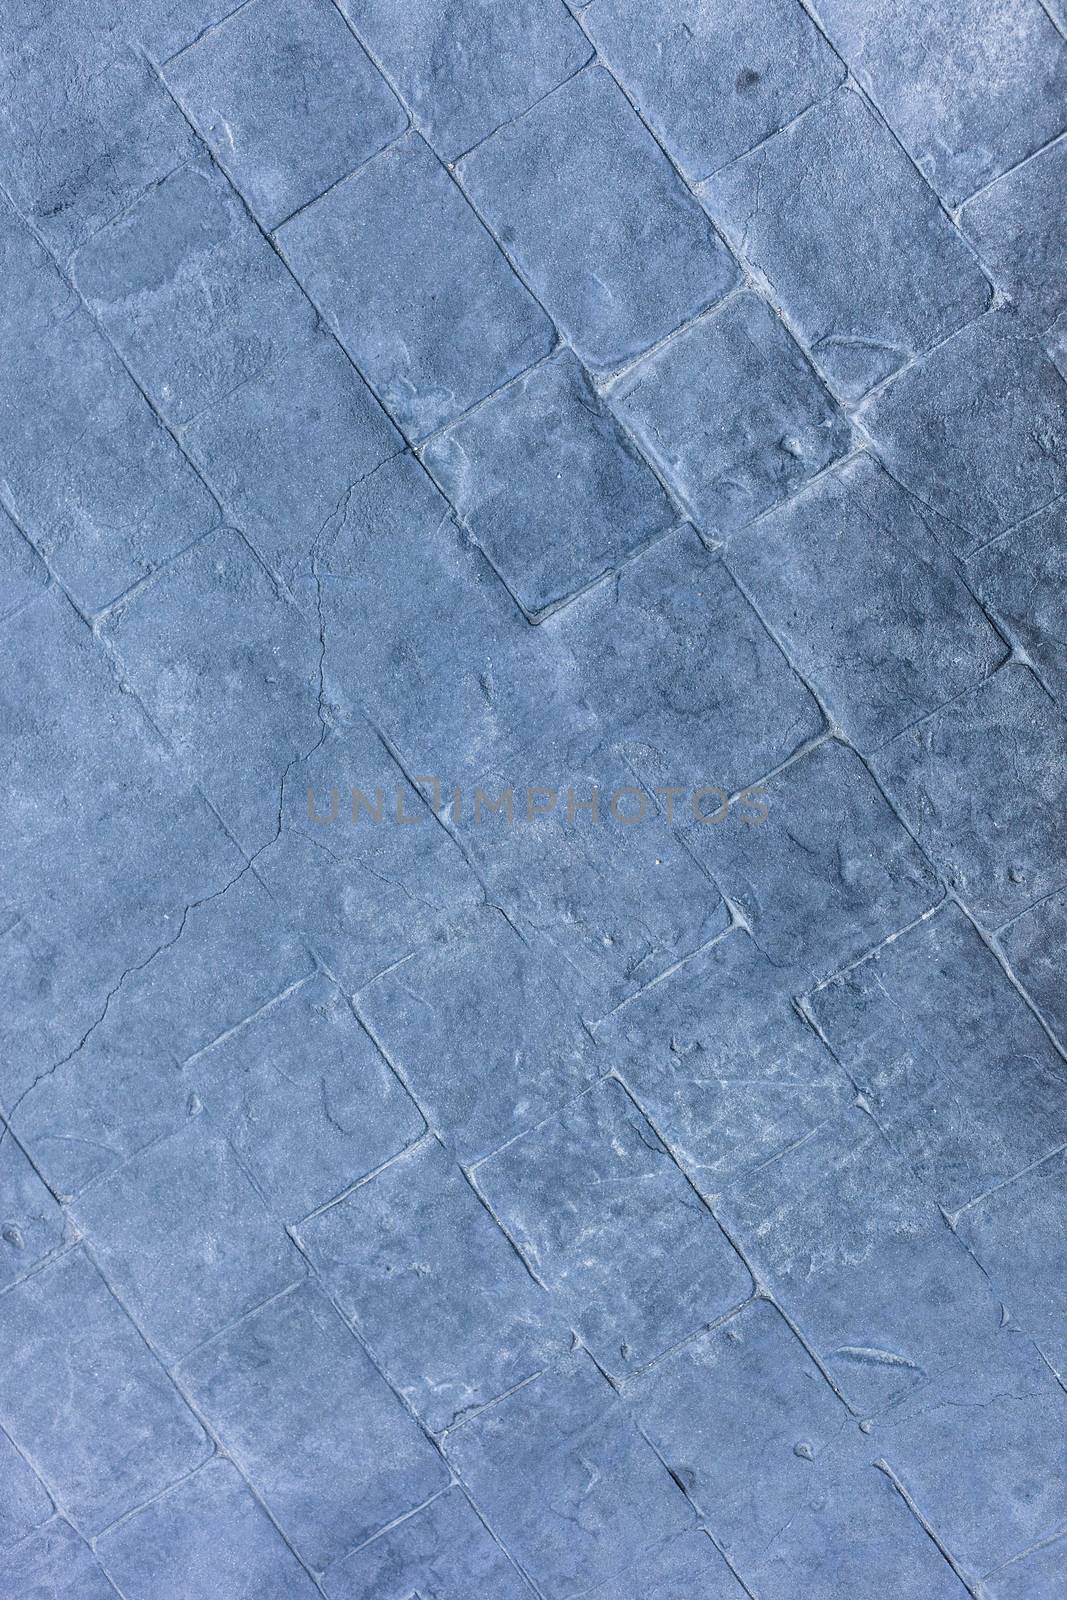 Slate texture vinyl flooring a popular choice for modern kitchens and bathrooms.